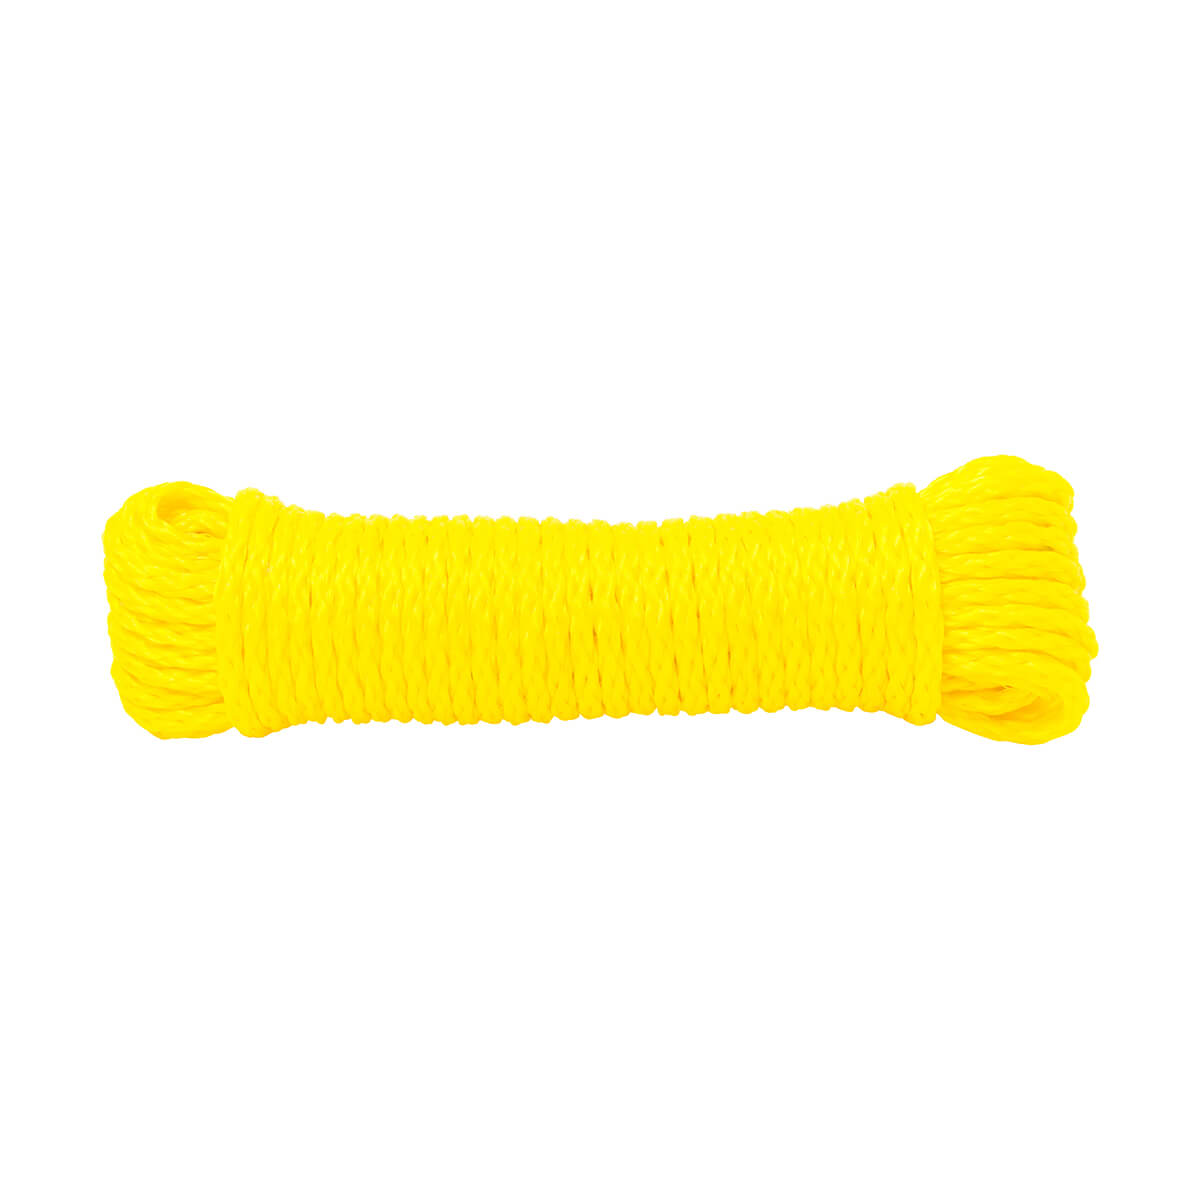 Polypropylene Hollow Core Rope - Yellow - 1/4-in x 50-ft